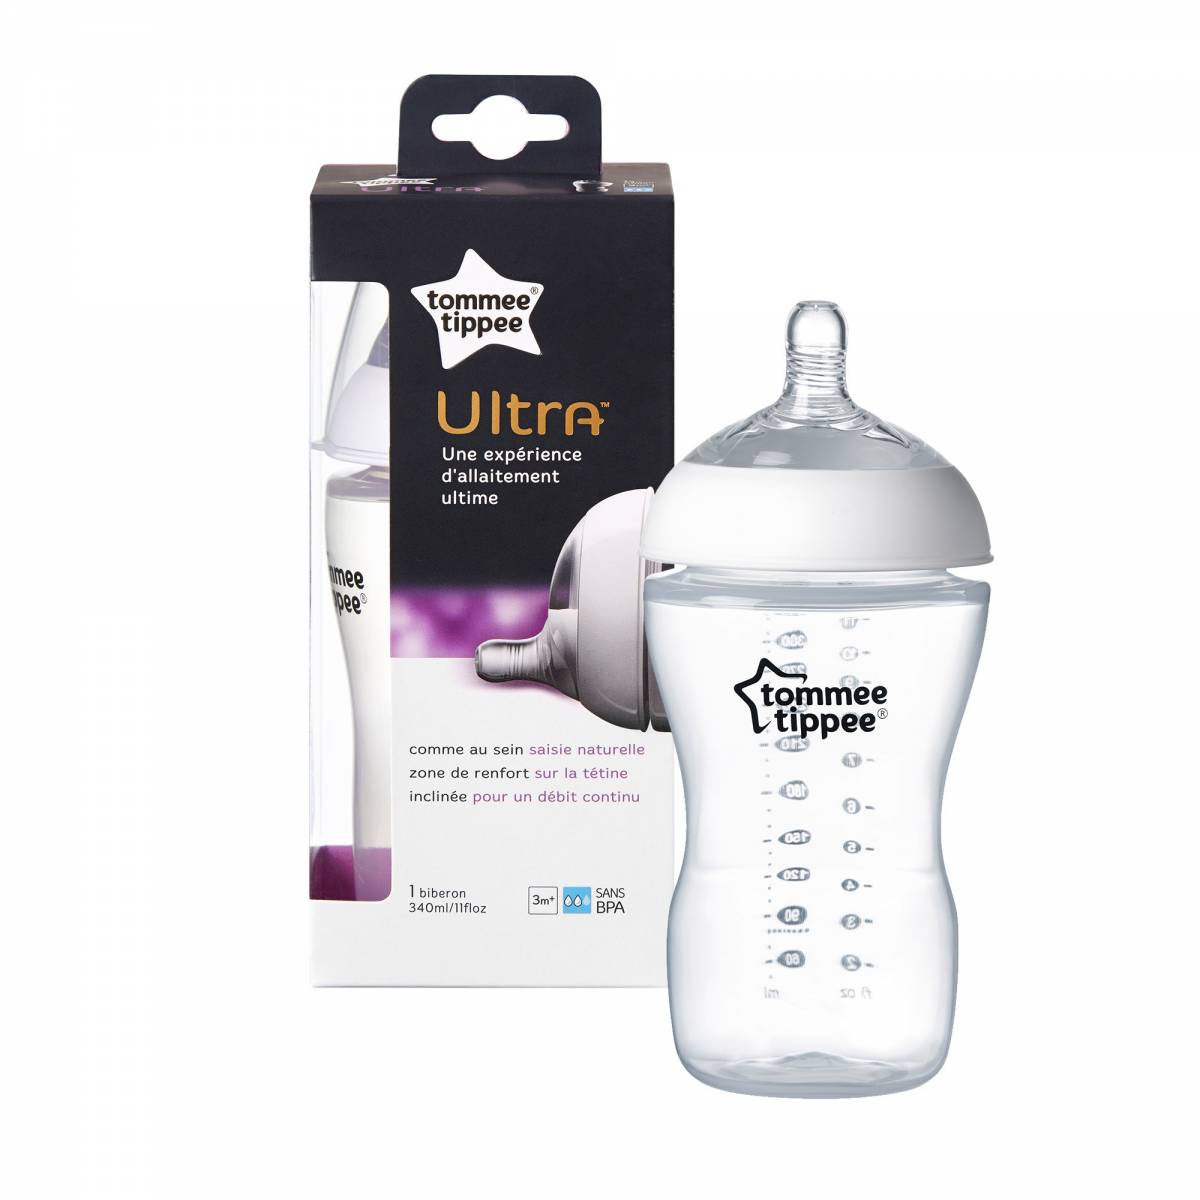 Tommee Tippee ULTRA 340ml bottle at discount prices